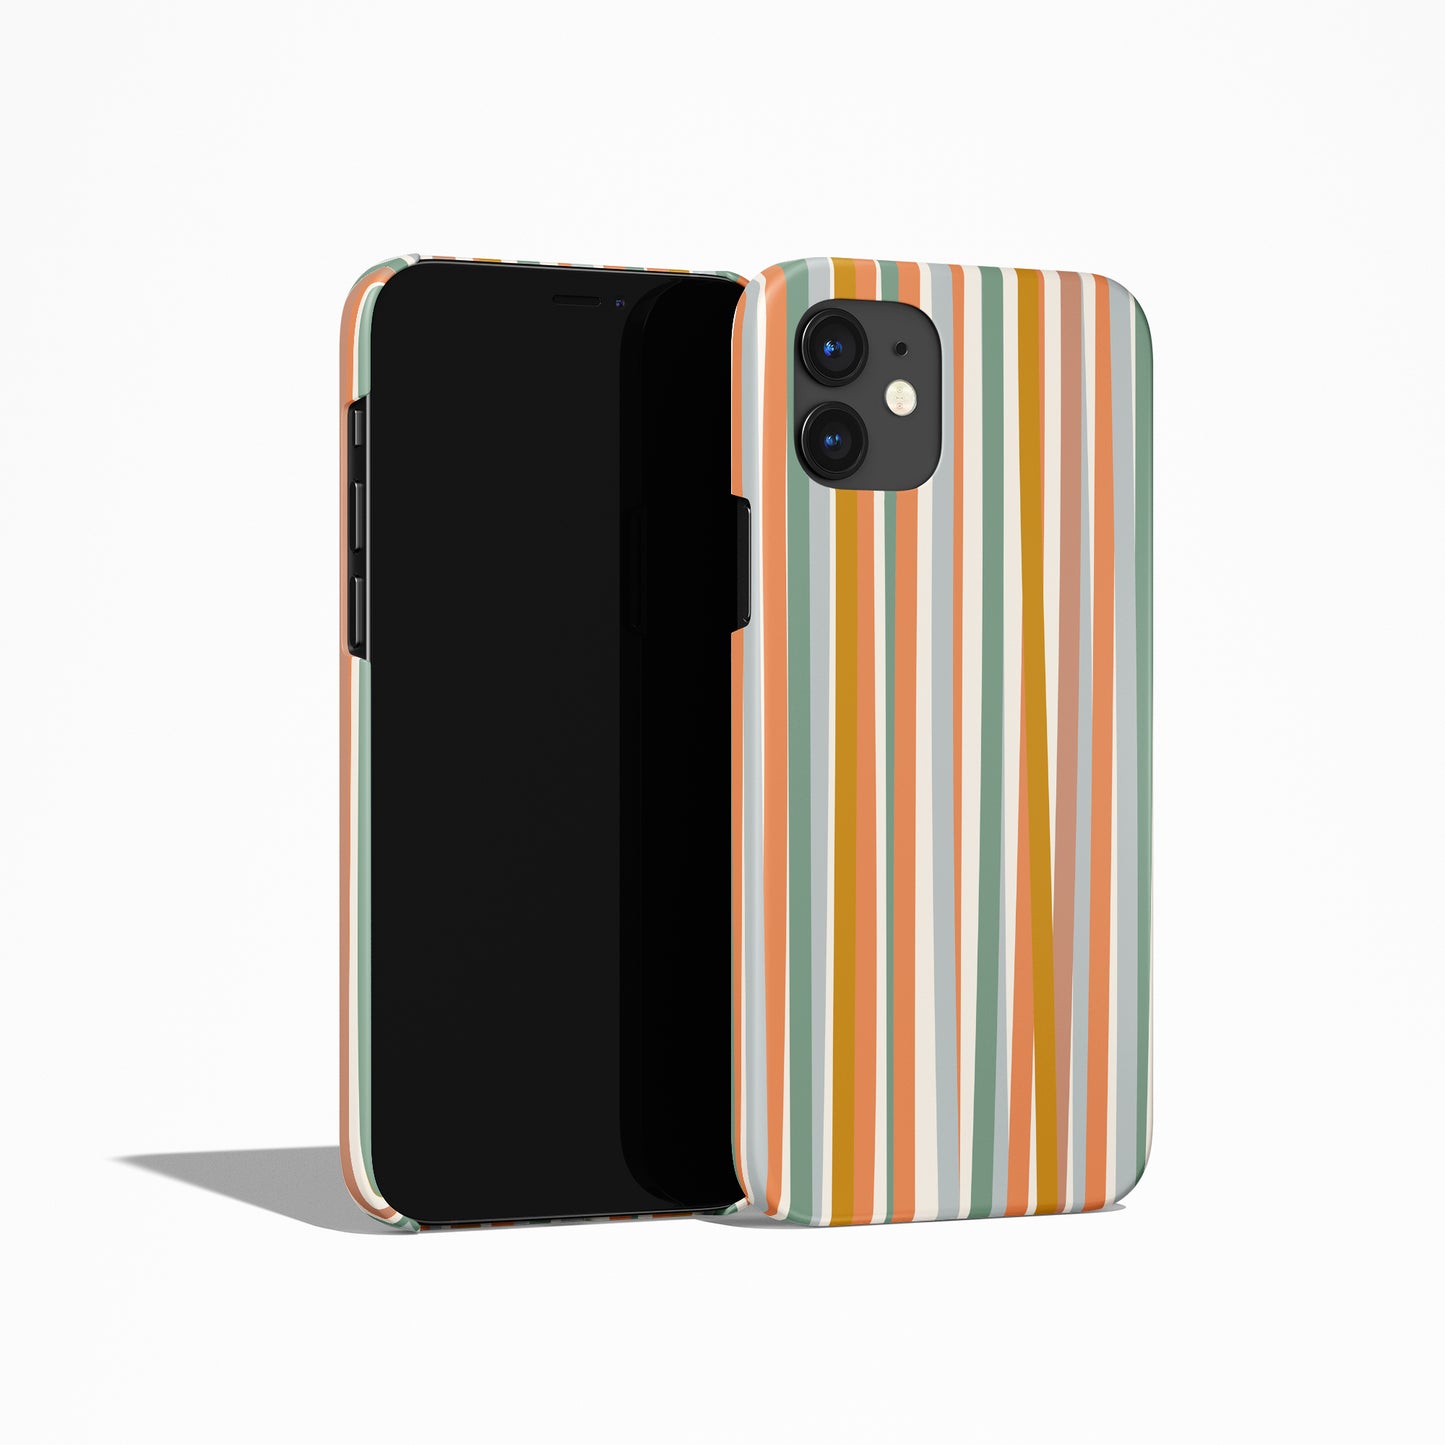 Colorful Striped iPhone Case